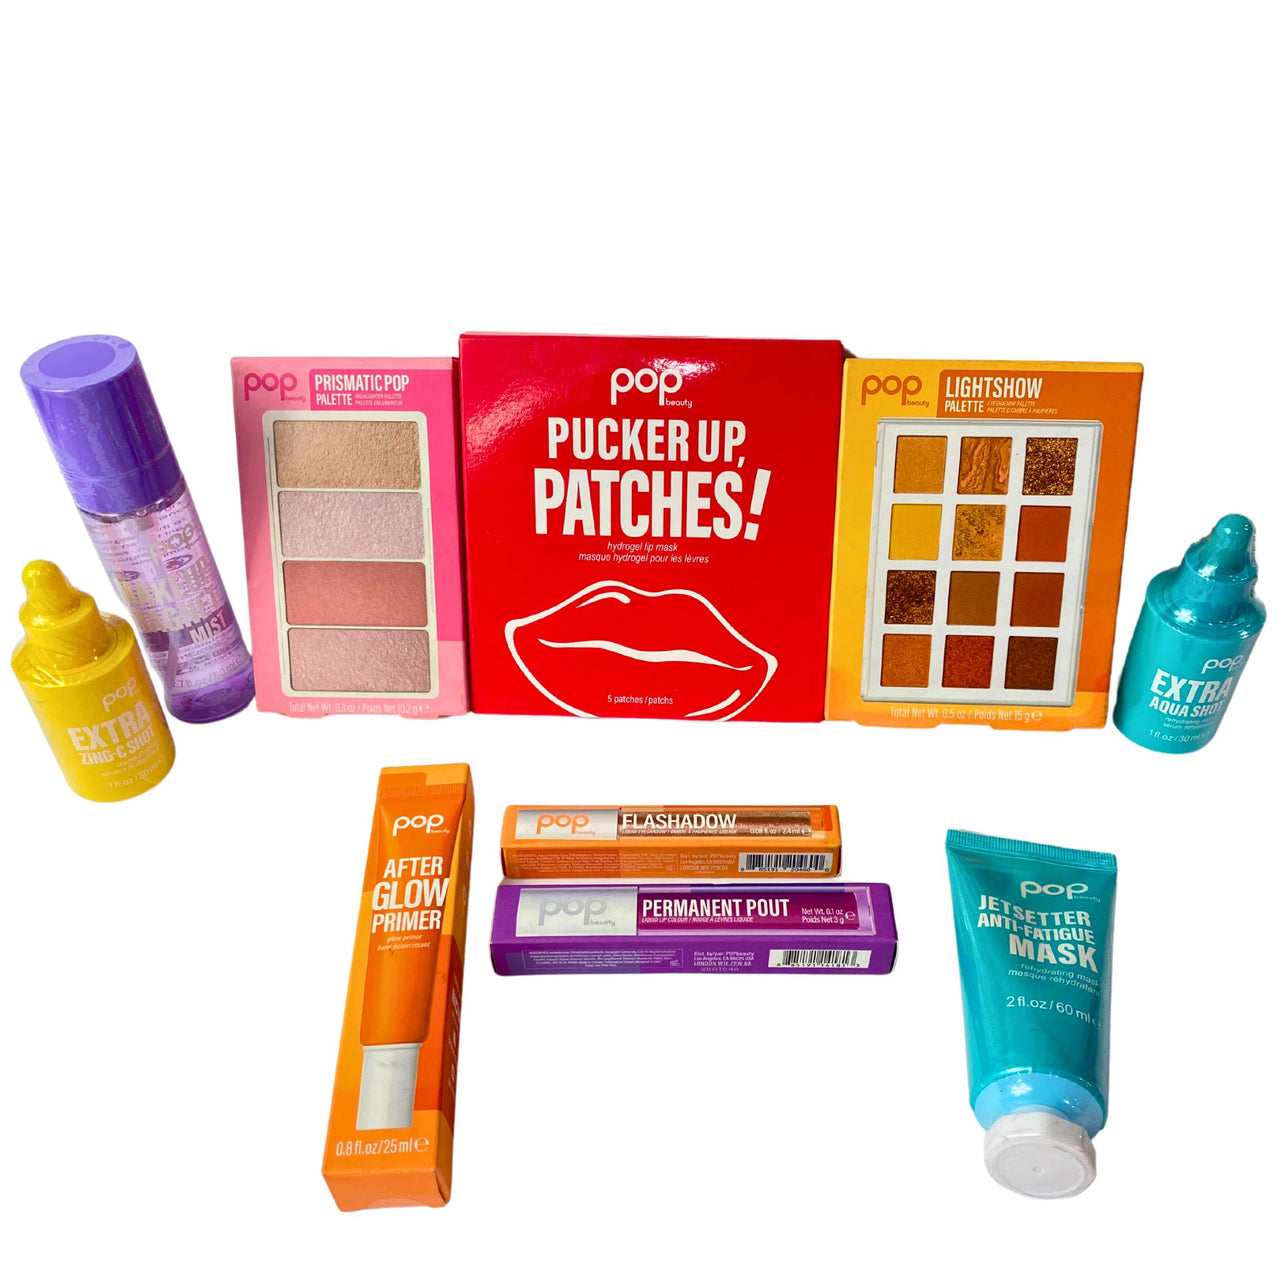 Pop Beauty Assorted Mix includes Skincare & Makeup Products 